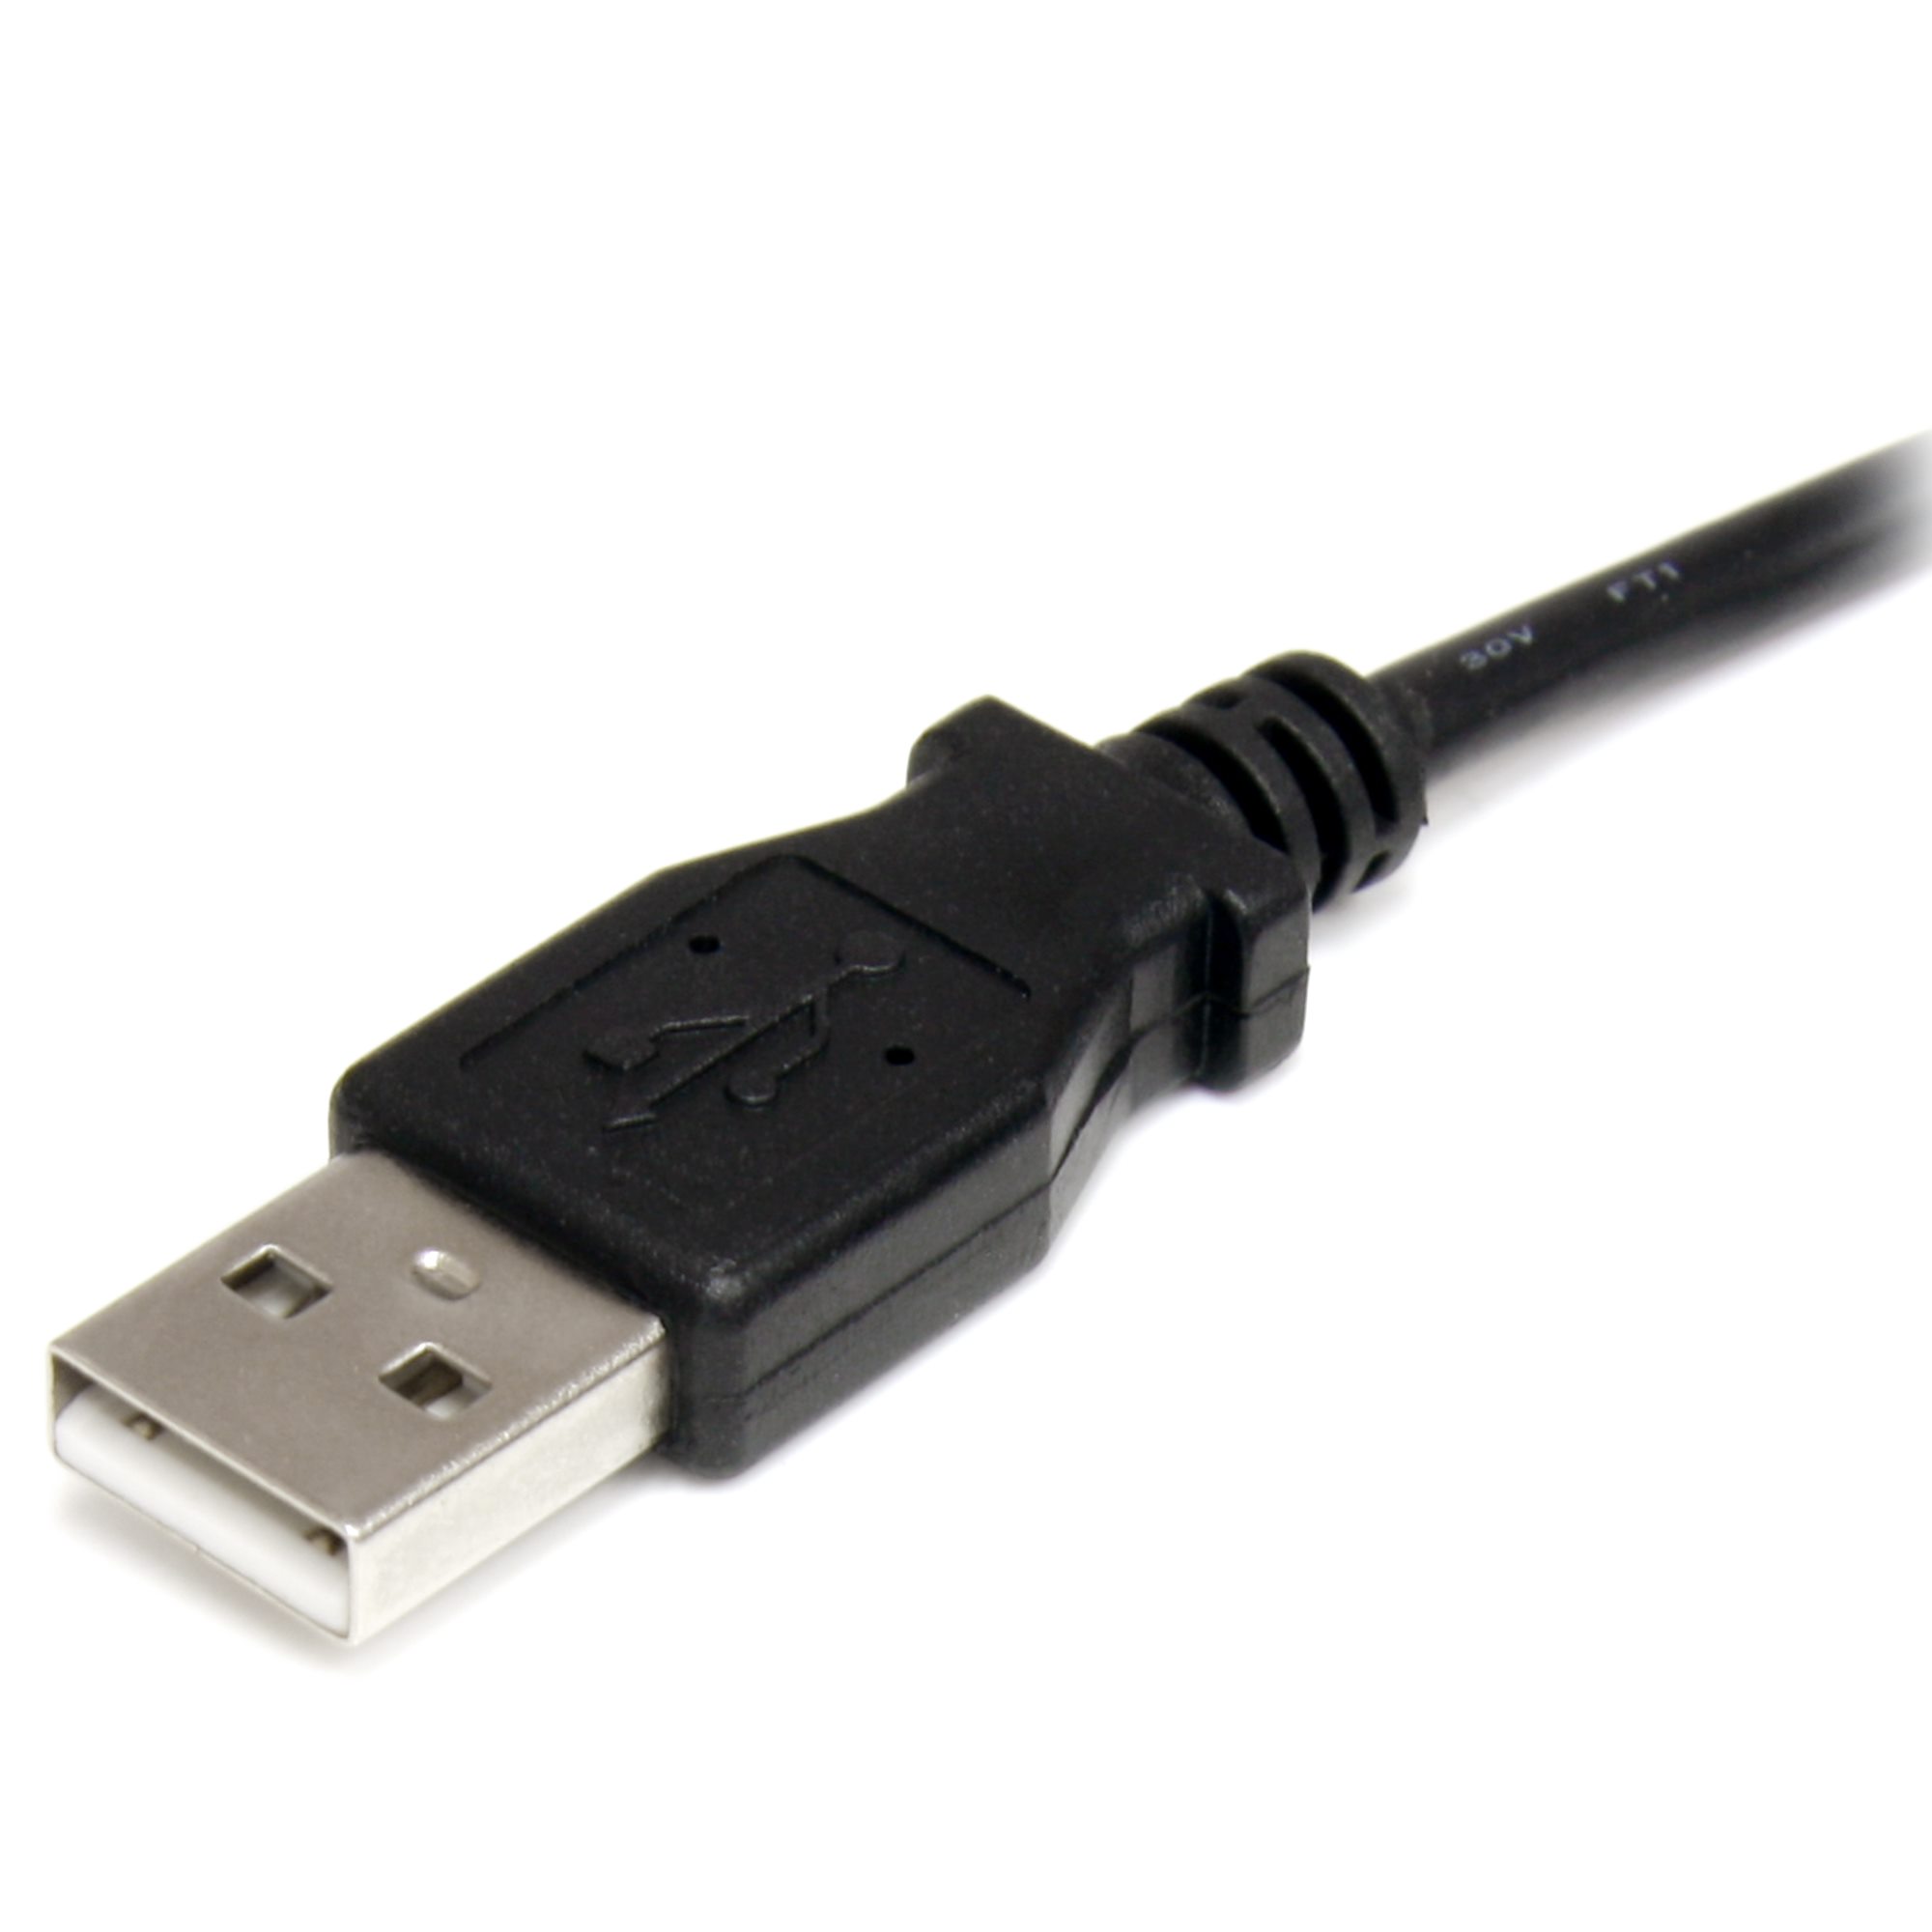 3ft USB to Type Barrel Power Cable - Cable USB 2.0 | Europa